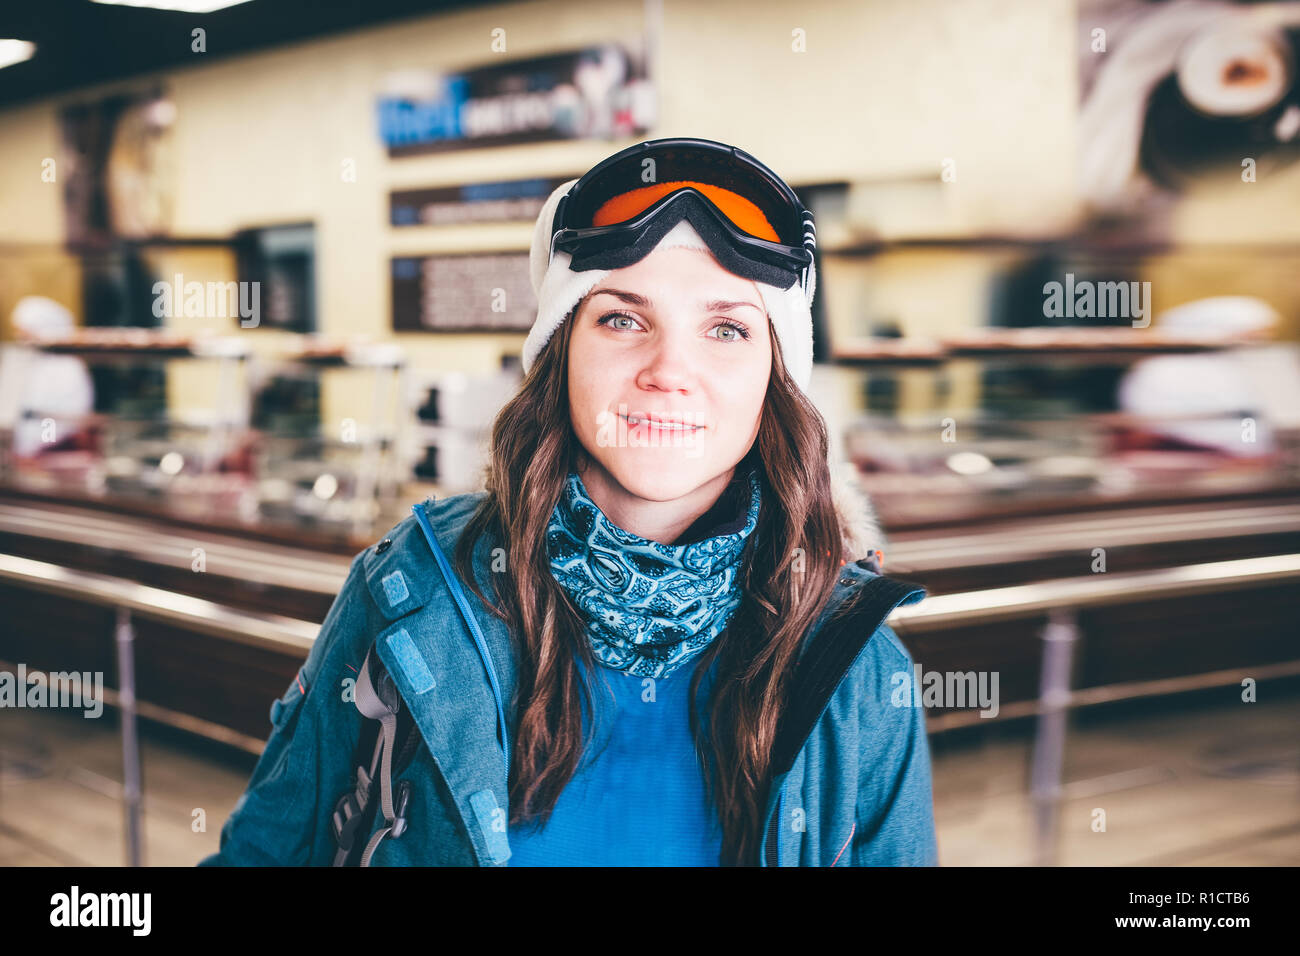 Happy girl on ski resort. Snowboarder on vacation. Lifestyle Concept Adventure winter physical activities. Stock Photo